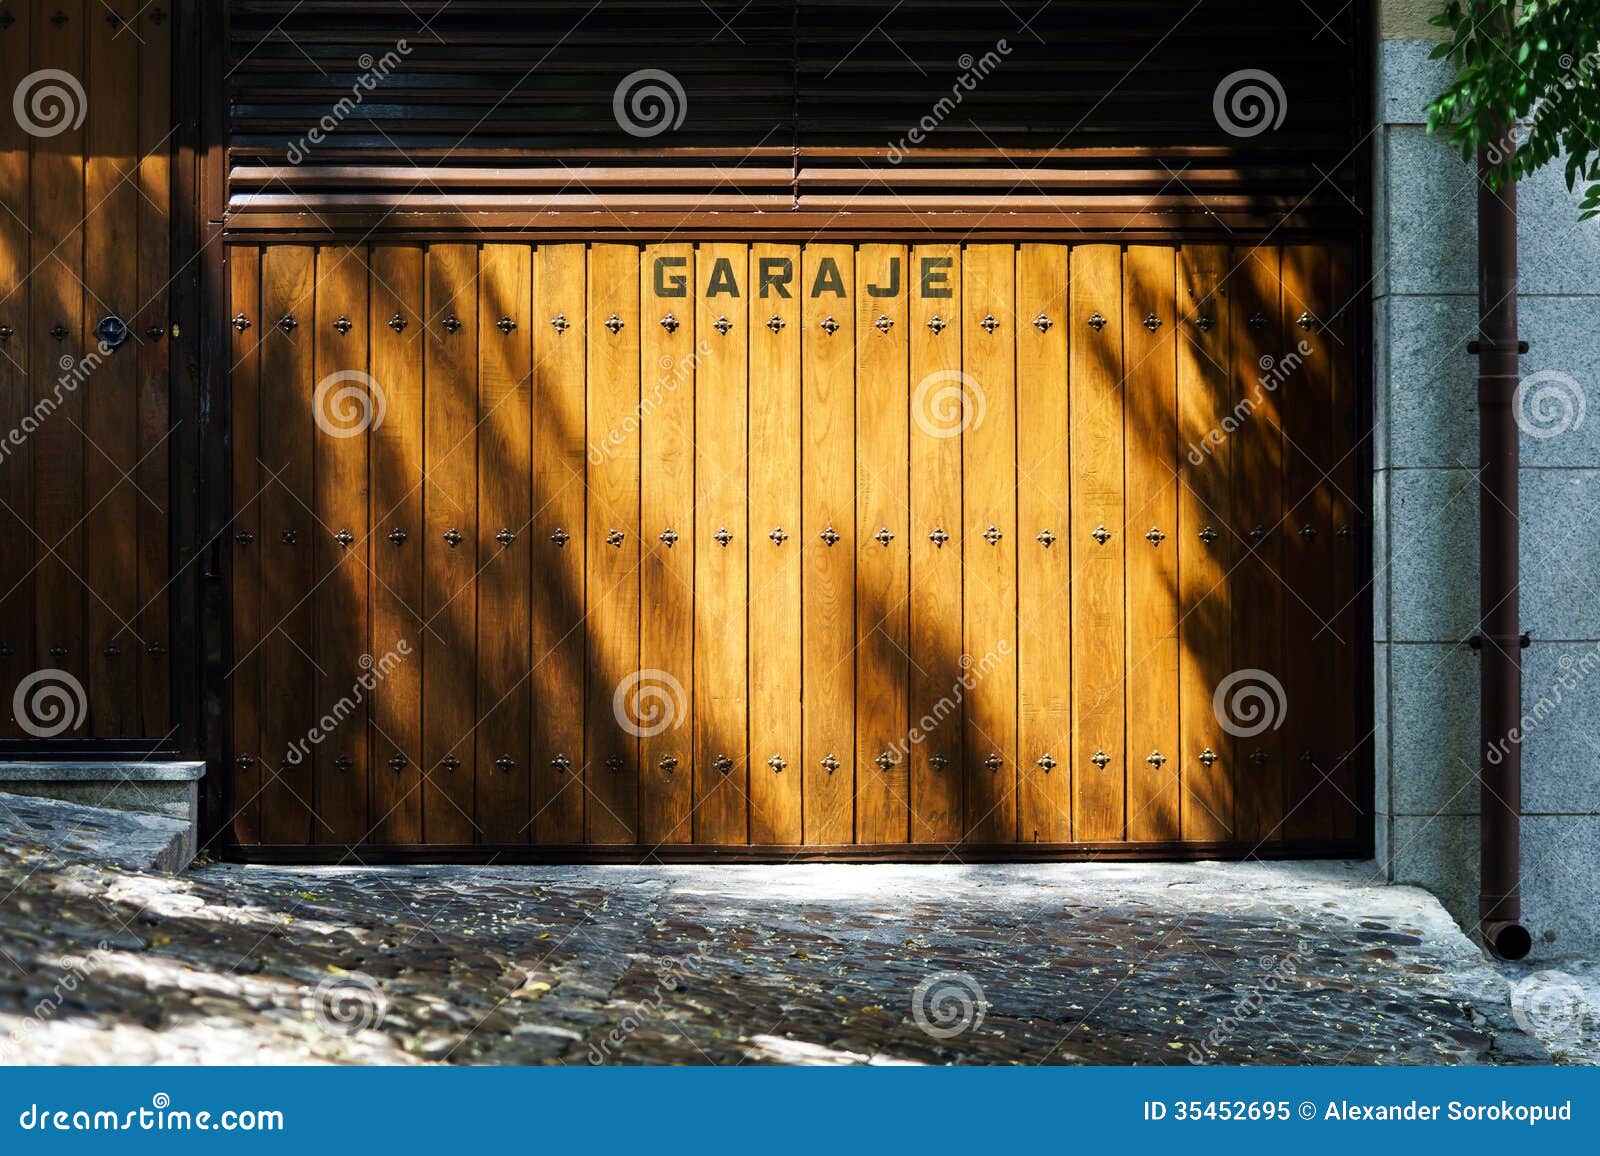 garage gates with shadows of trees